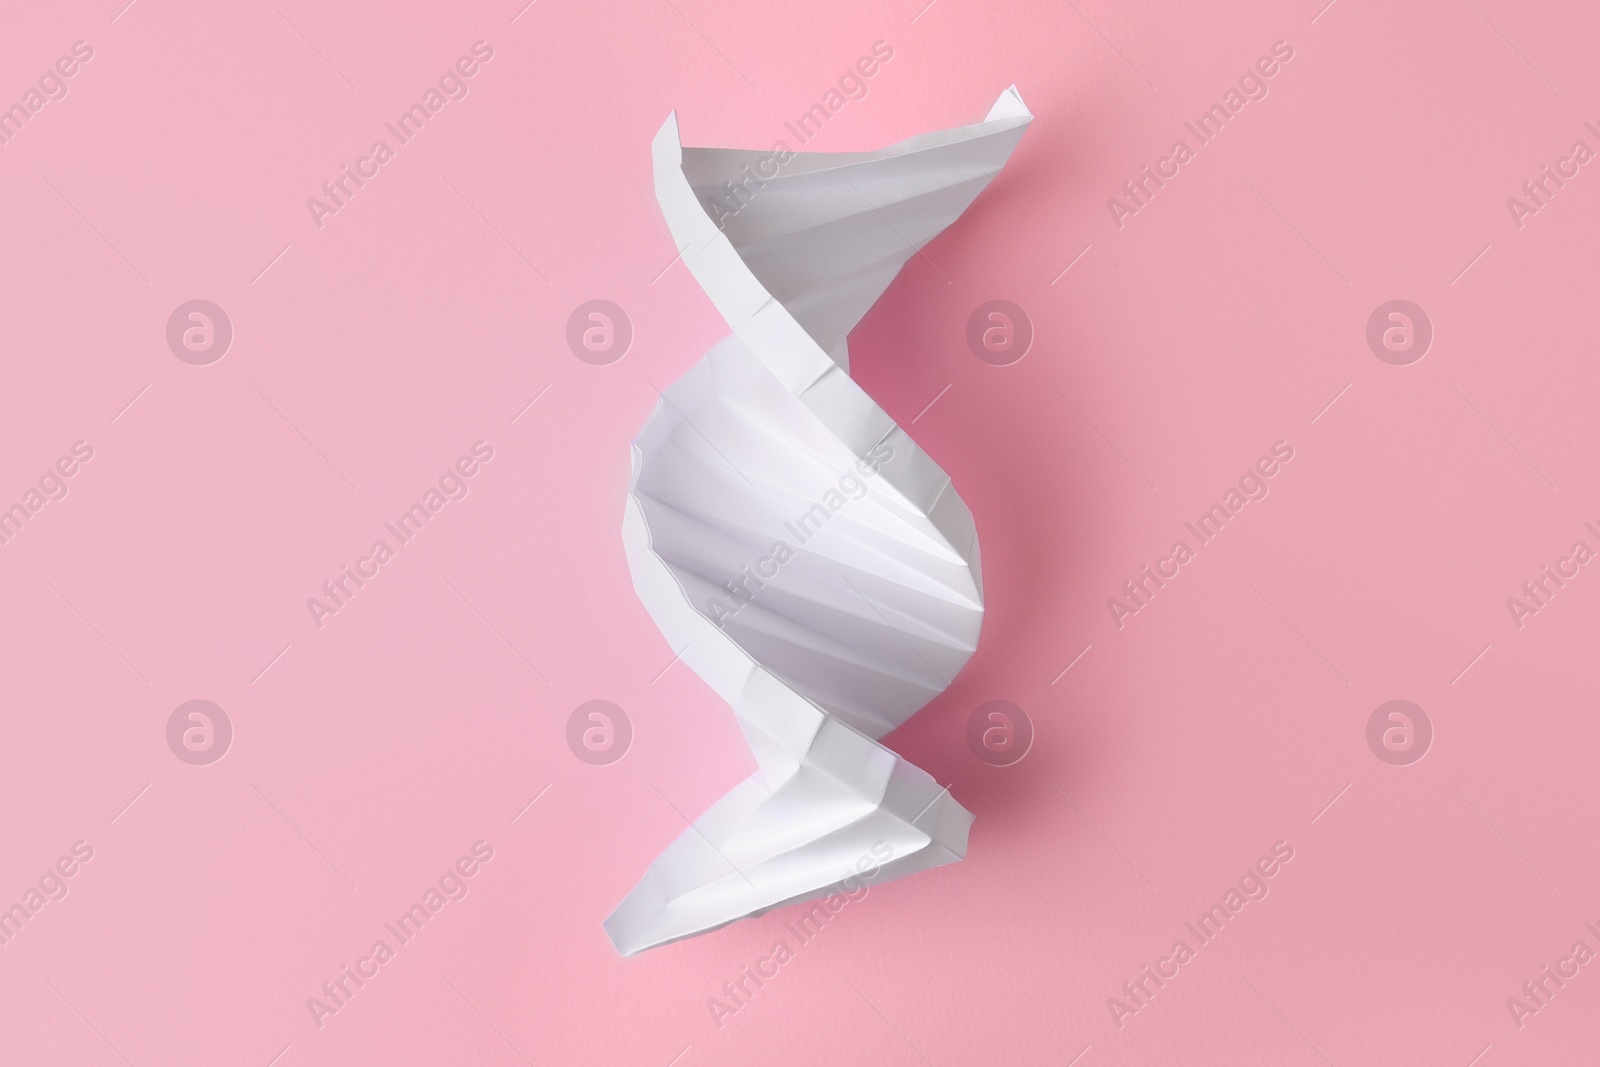 Photo of Paper model of DNA molecular chain on pink background, top view